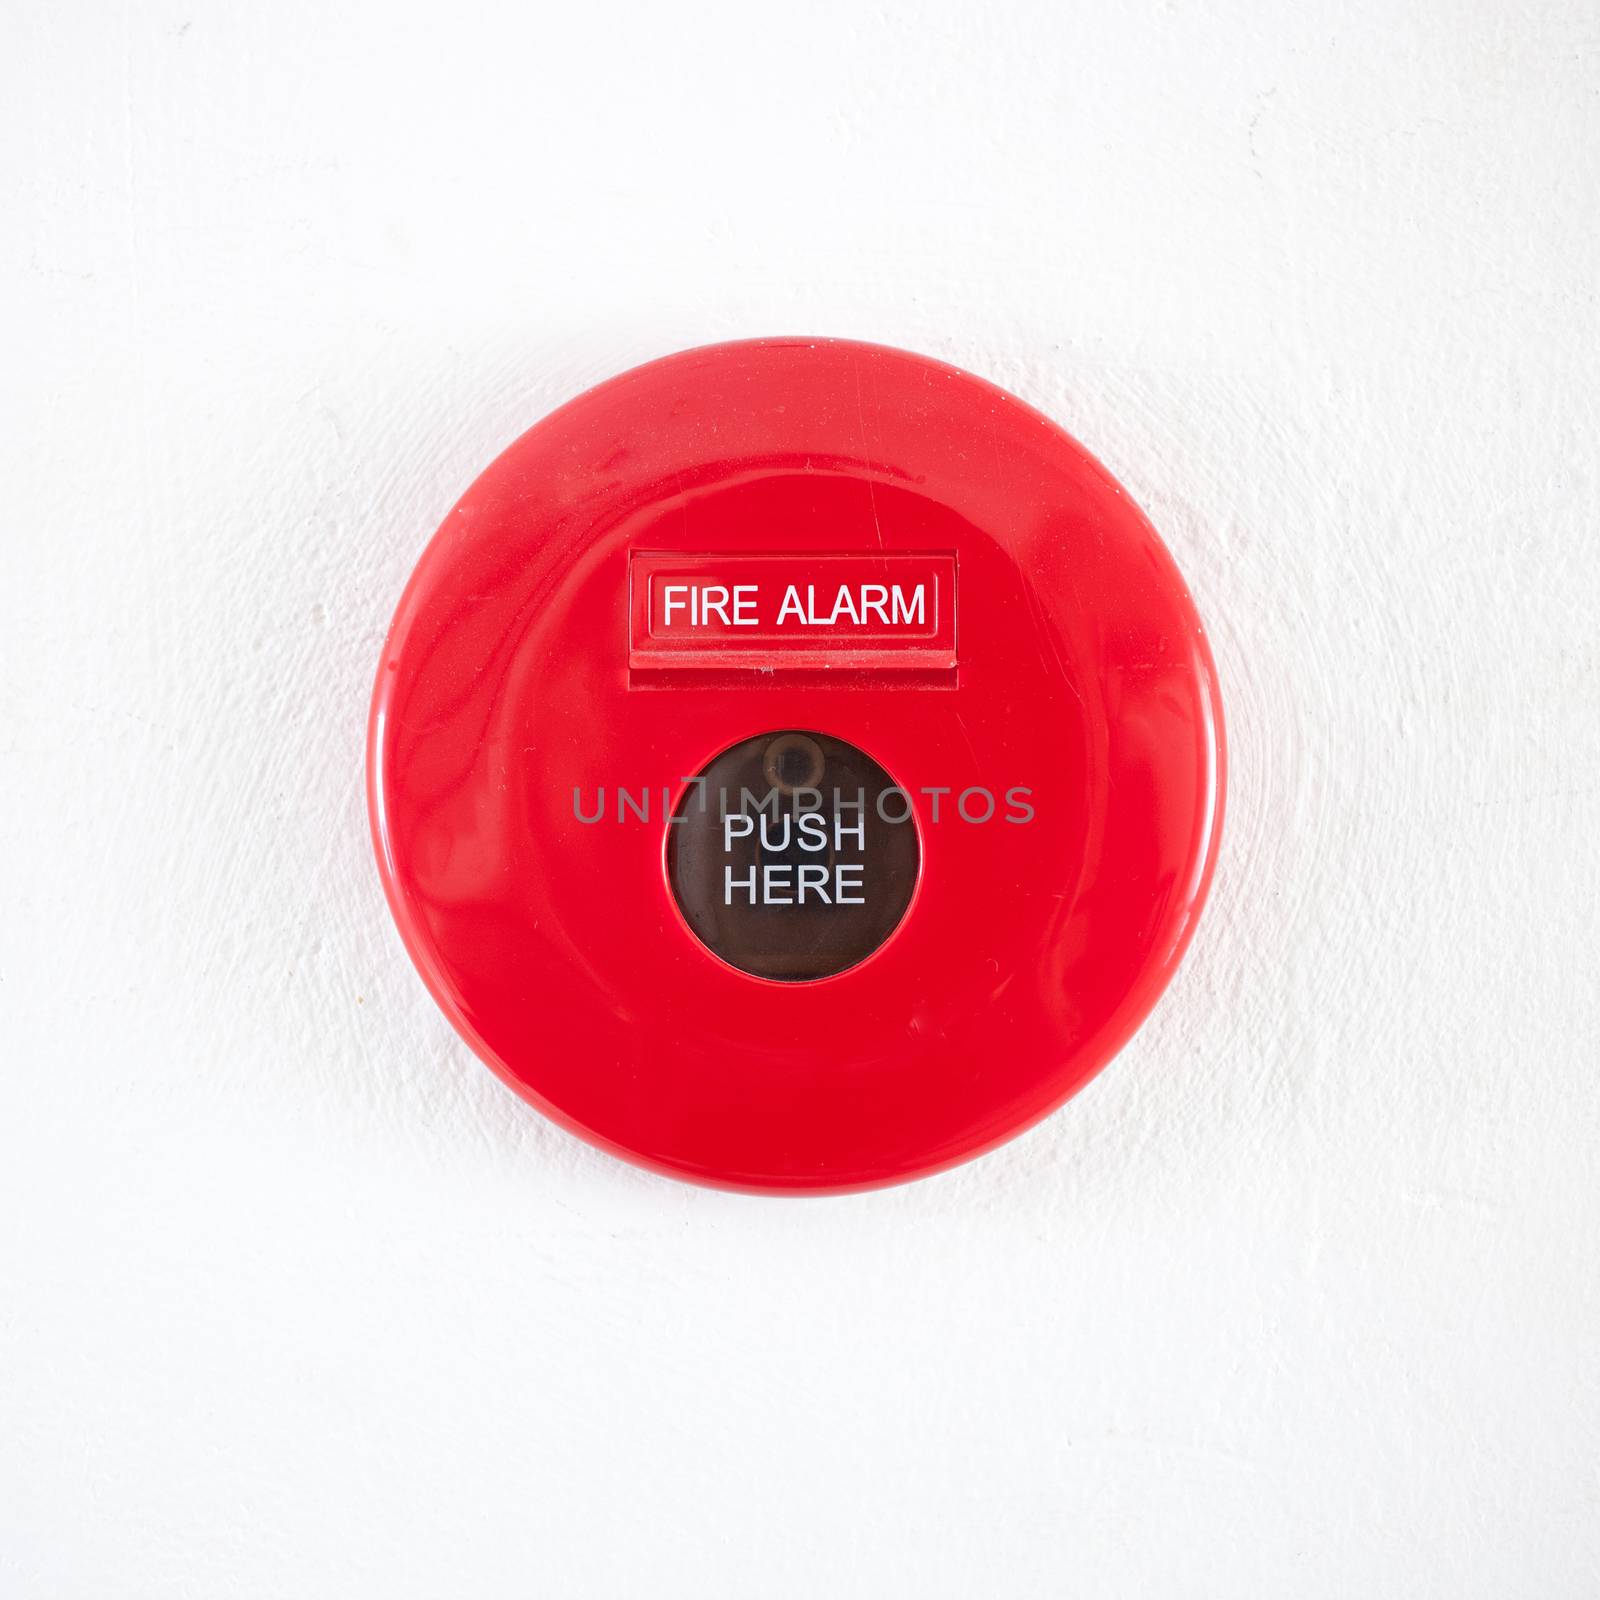 Fire alarm on a white concrete wall by nopparats